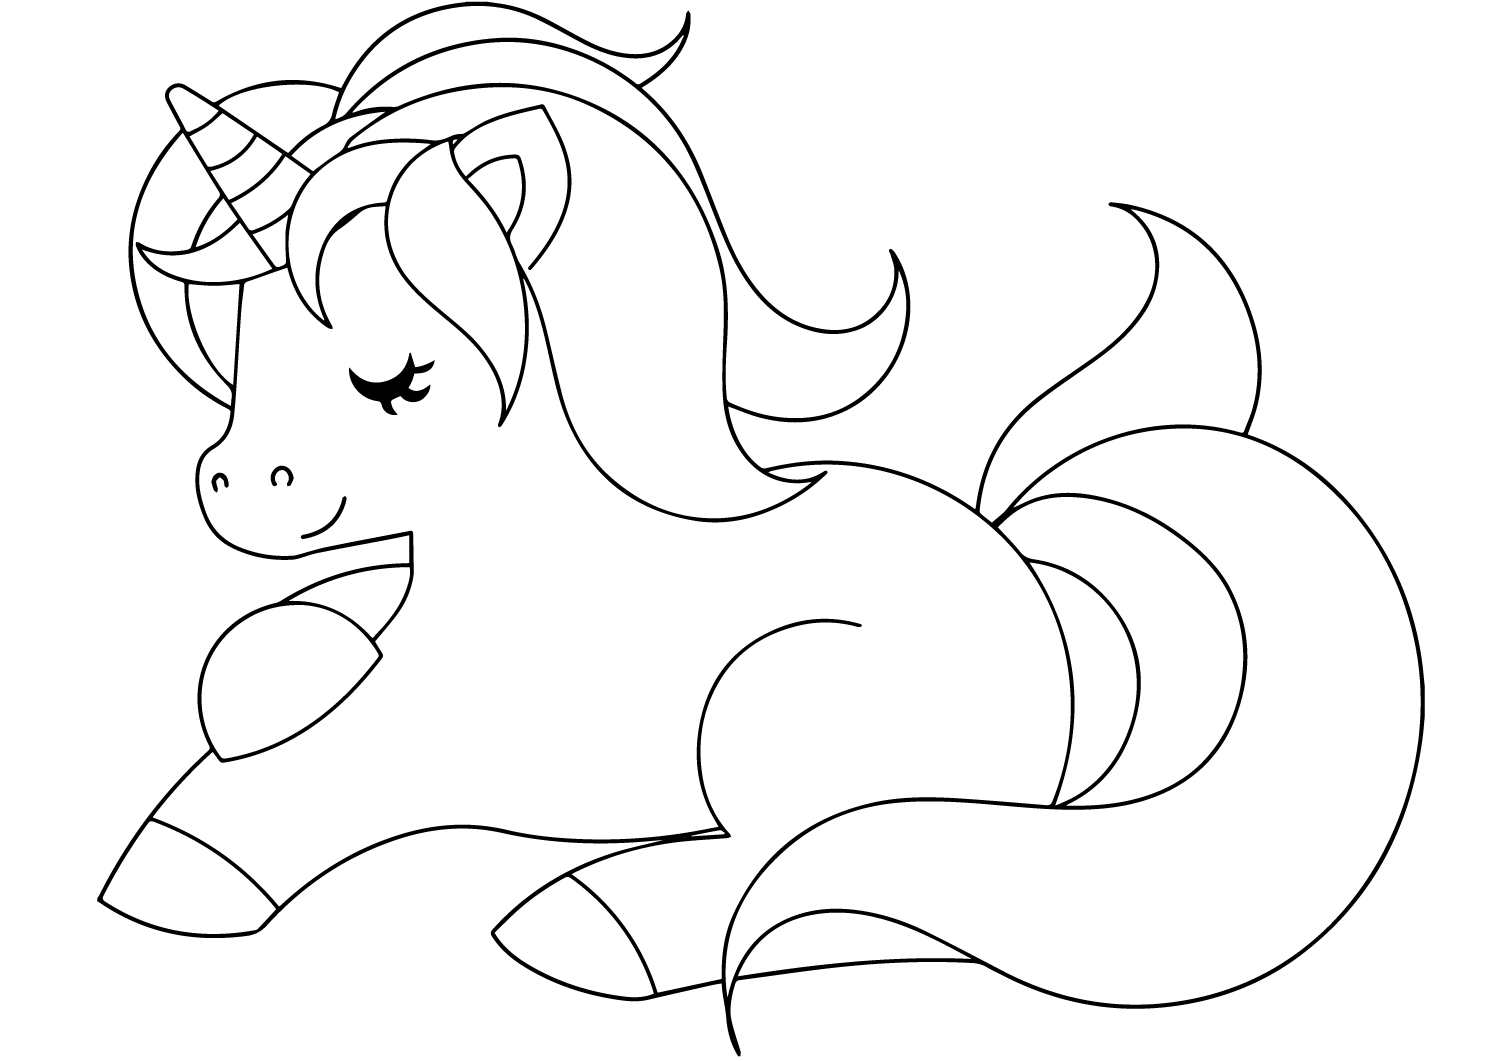 Cute Unicorn Coloring Pages   Coloring Cool